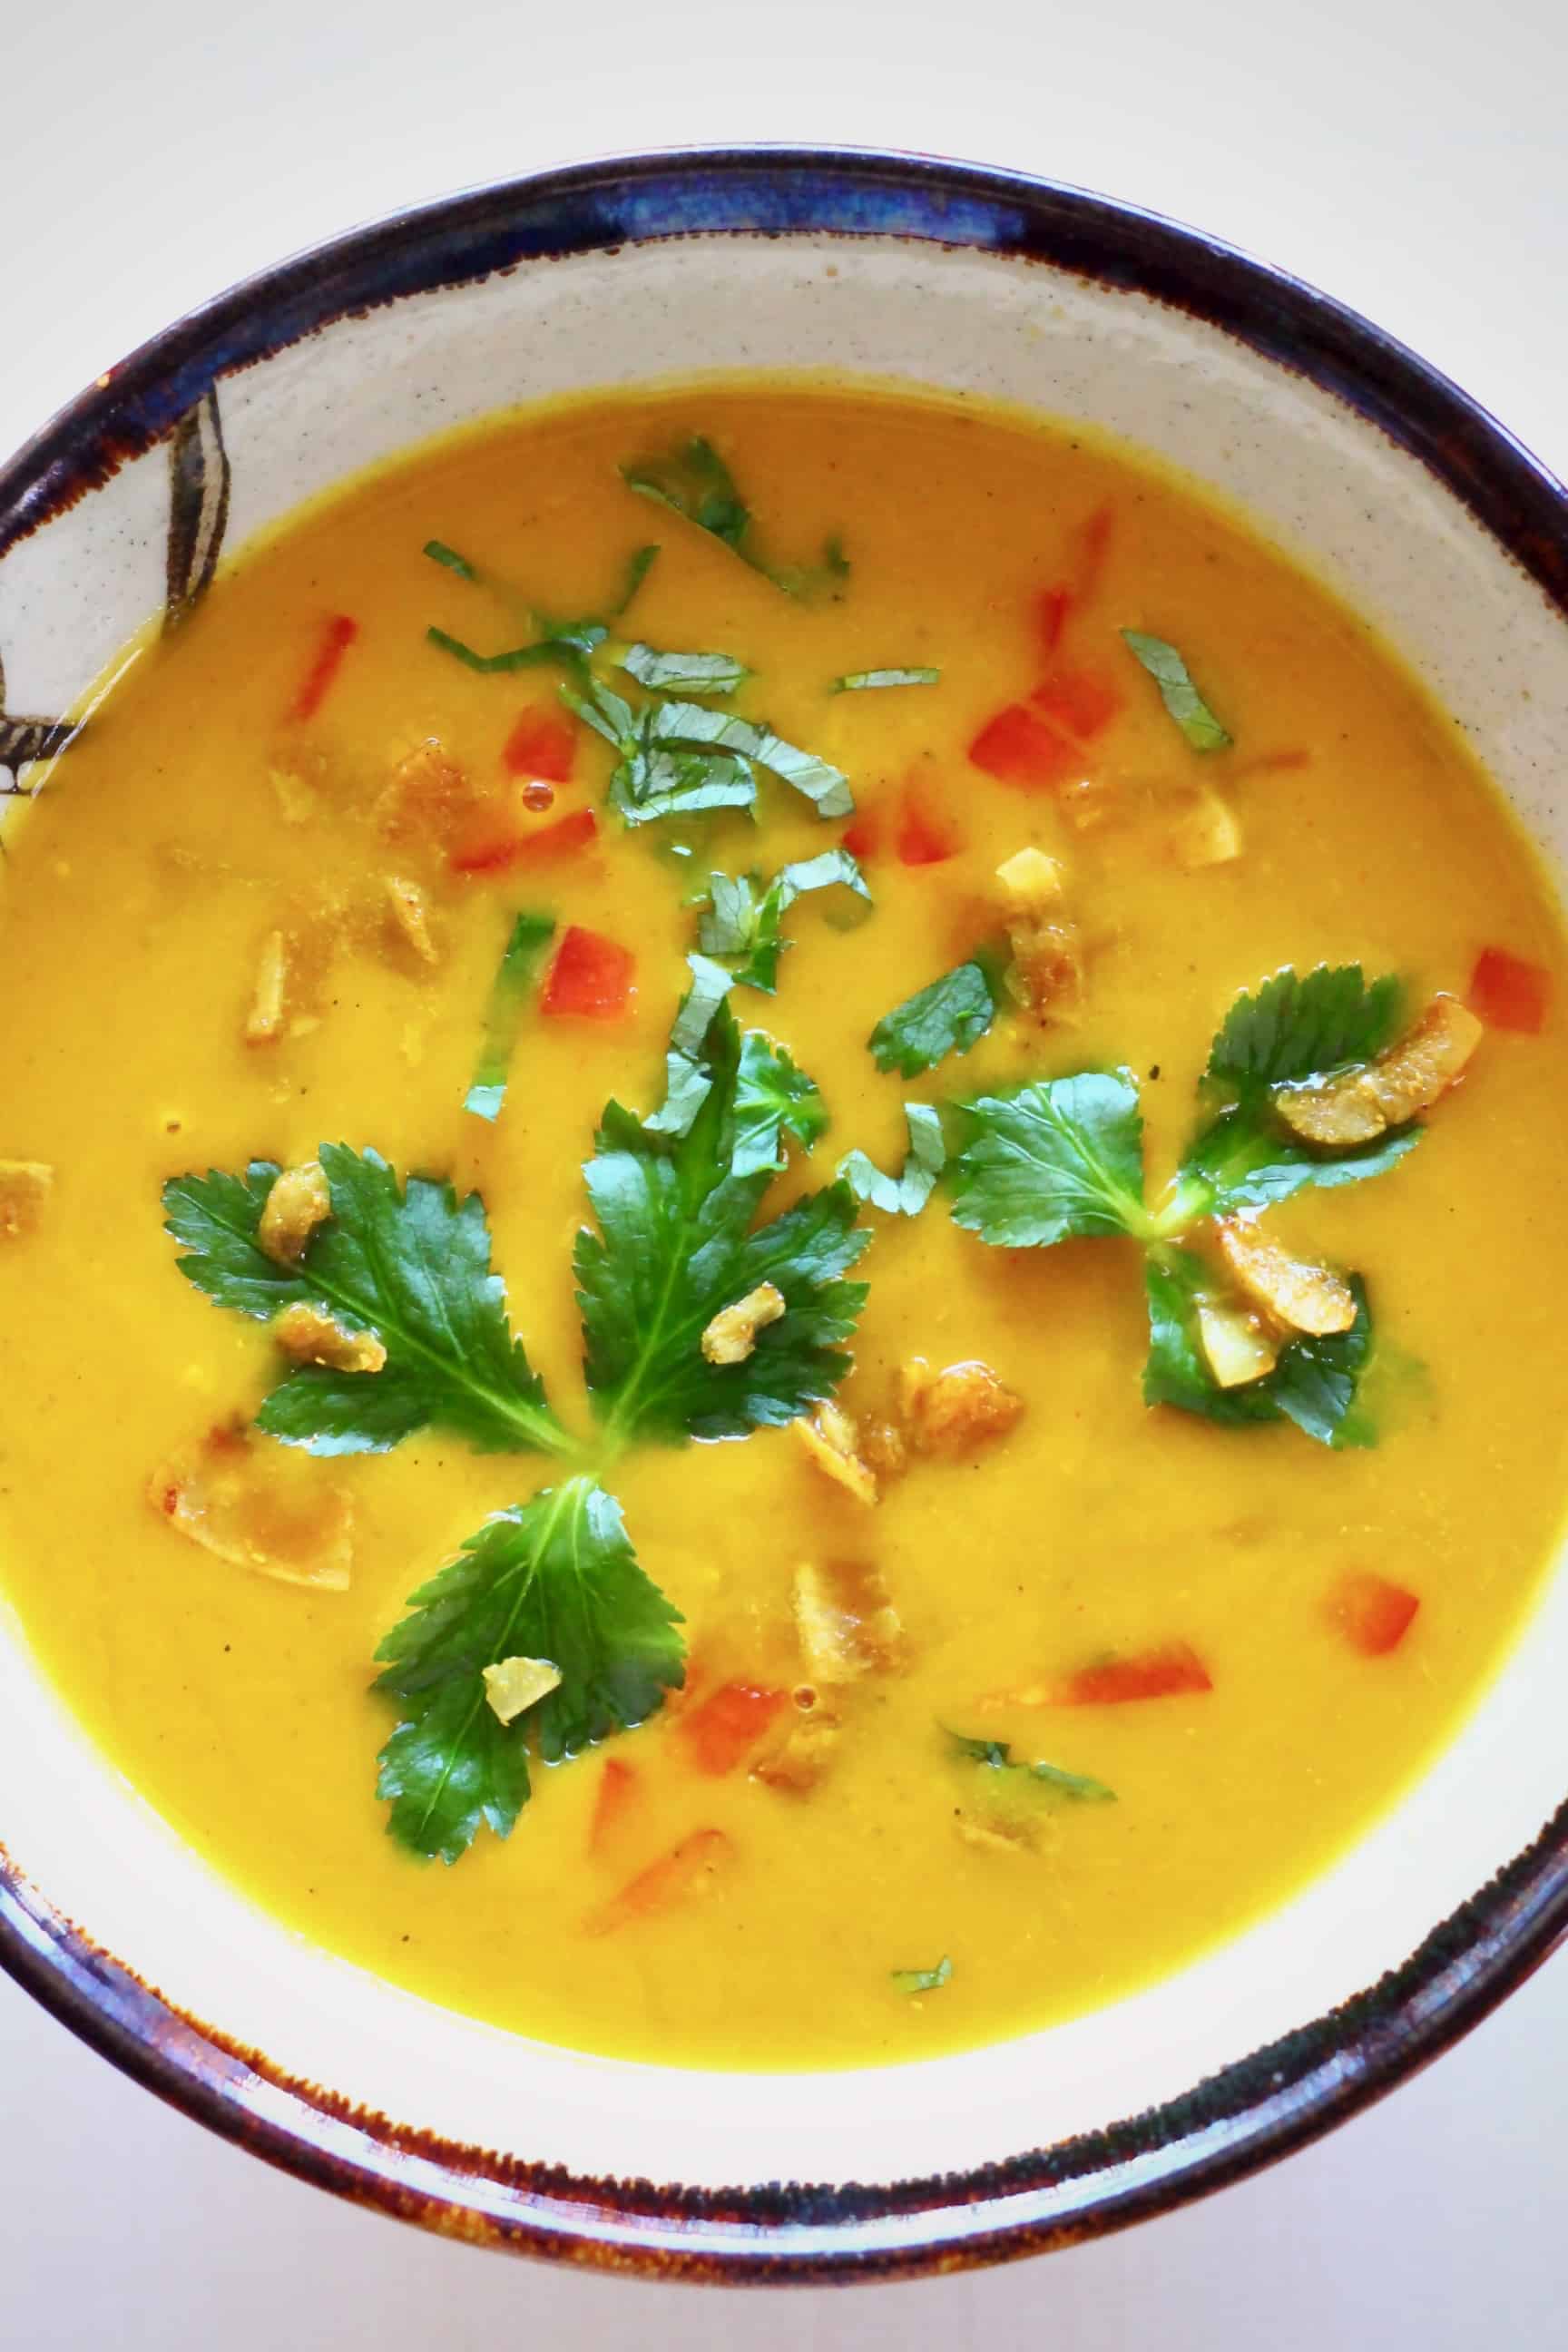 Orange soup topped with coconut flakes, red peppers and green herbs in a white bowl with a dark brown rim